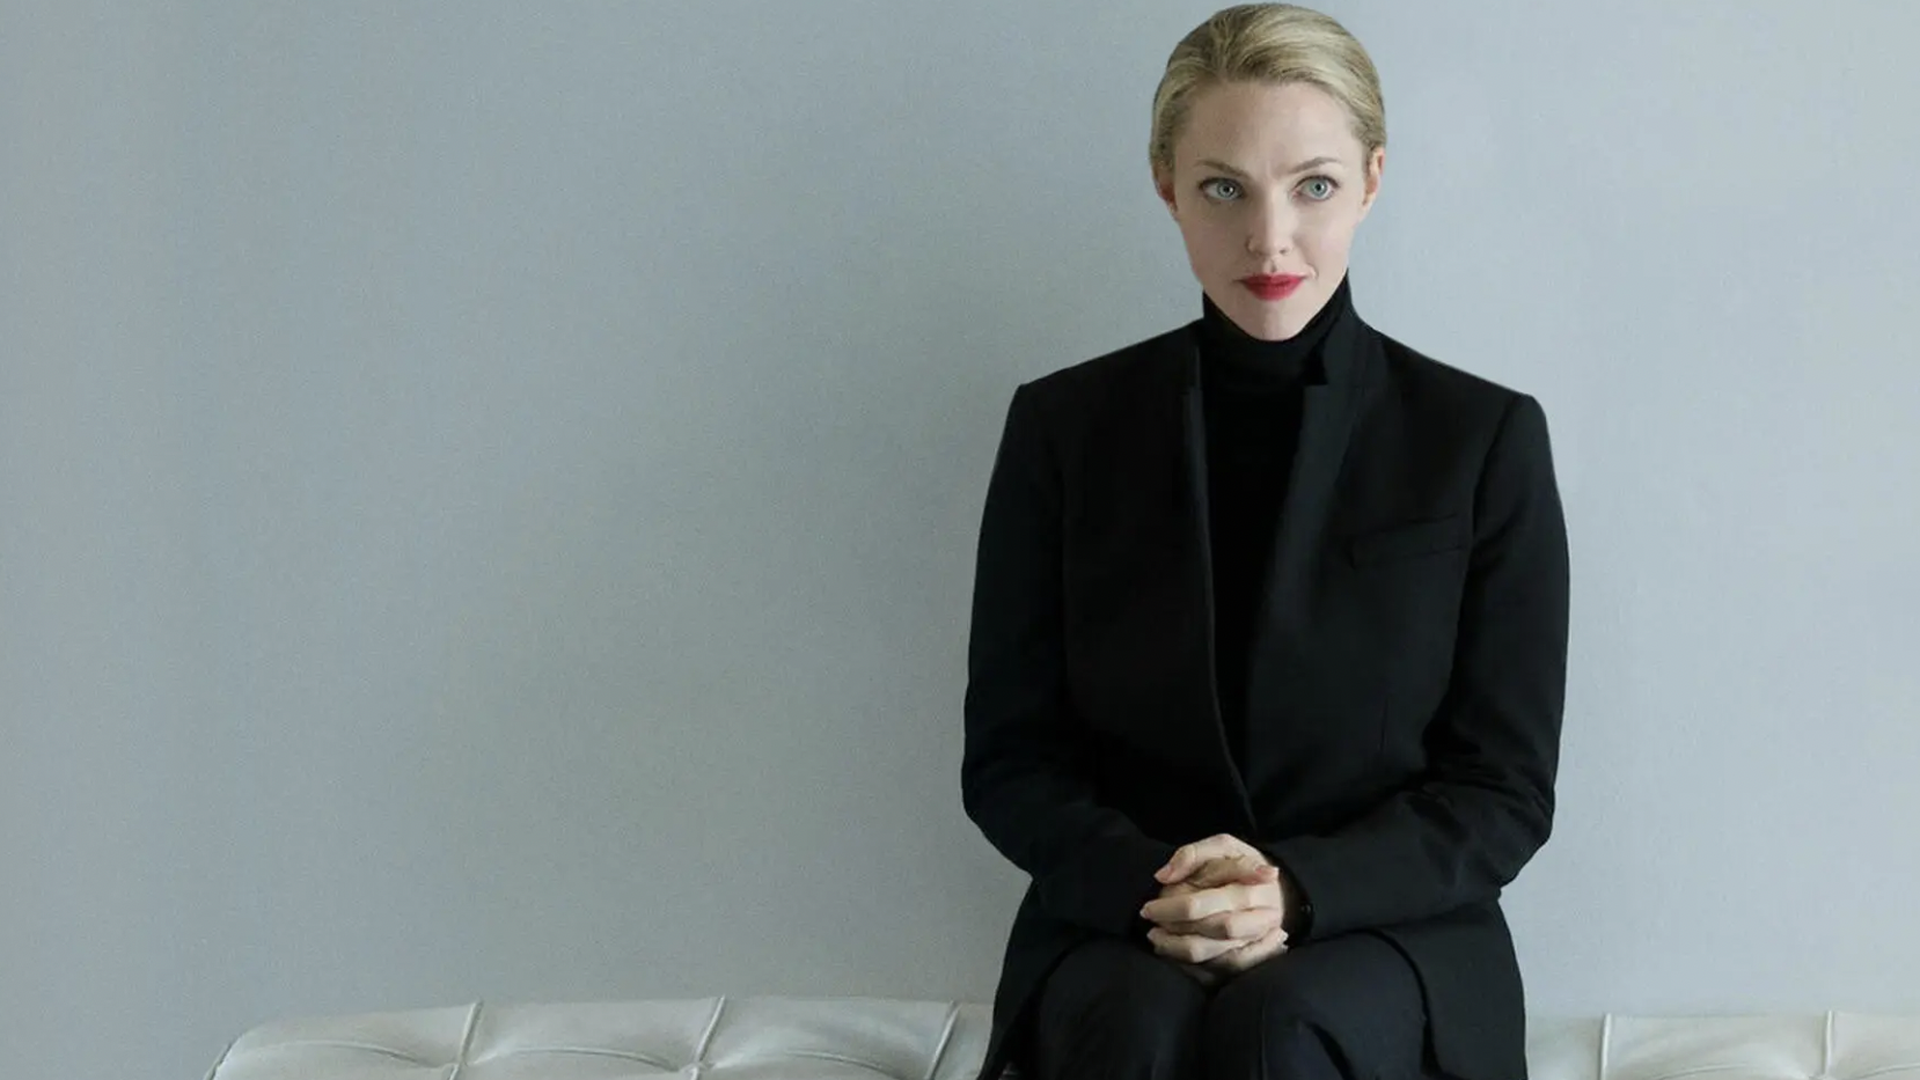 Amanda Seyfried portraying ex-Theranos CEO Elizabeth Holmes for an upcoming Hulu limited series